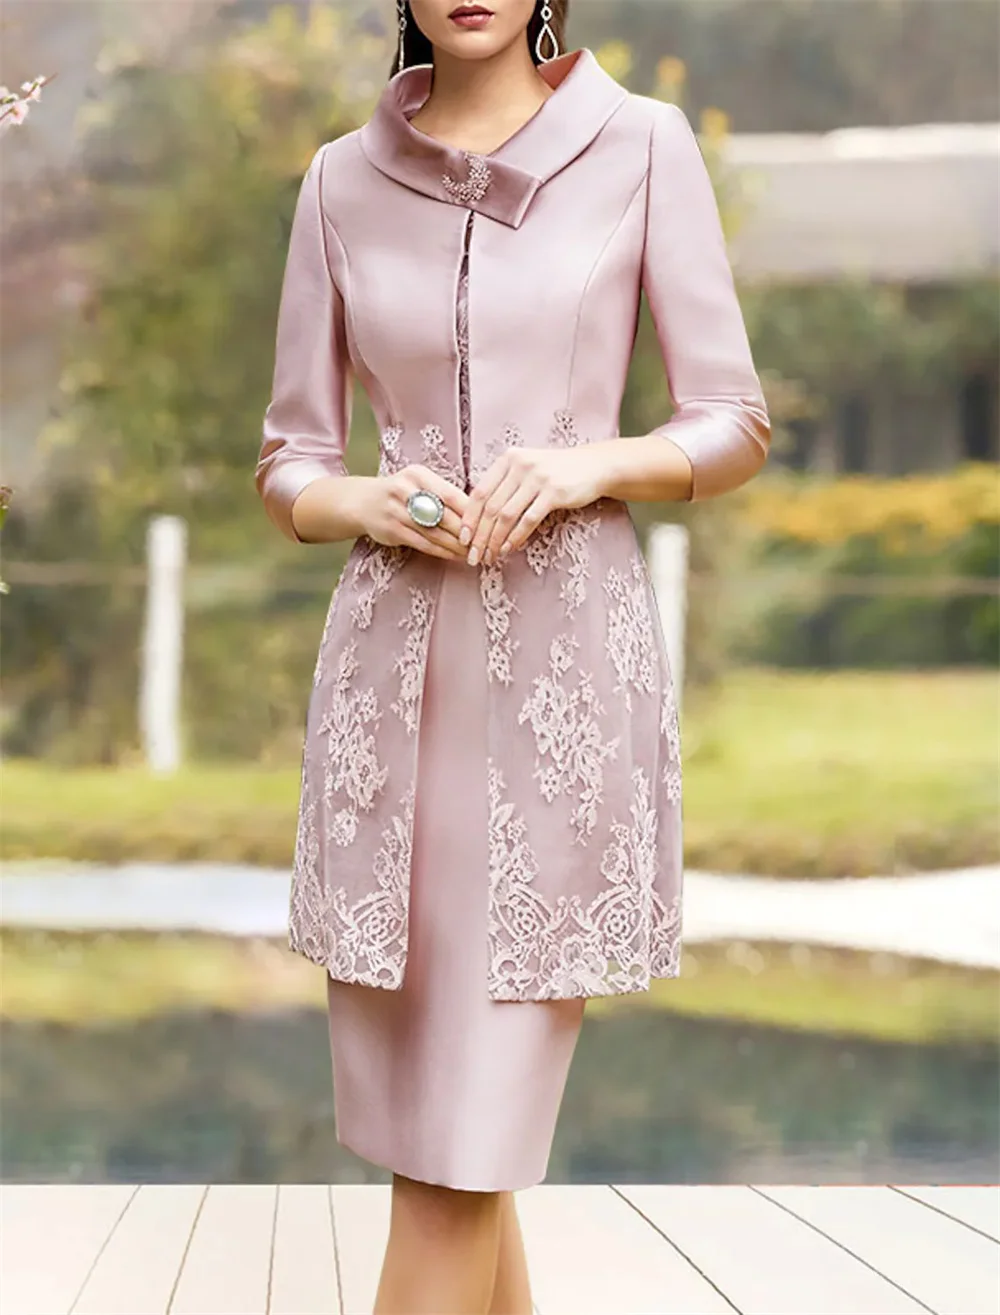 

Two Piece Sheath Column Mother of the Bride Dress Elegant Wrap Included Jewel Neck Knee Length Lace Charmeuse 3/4 Length Sleeve